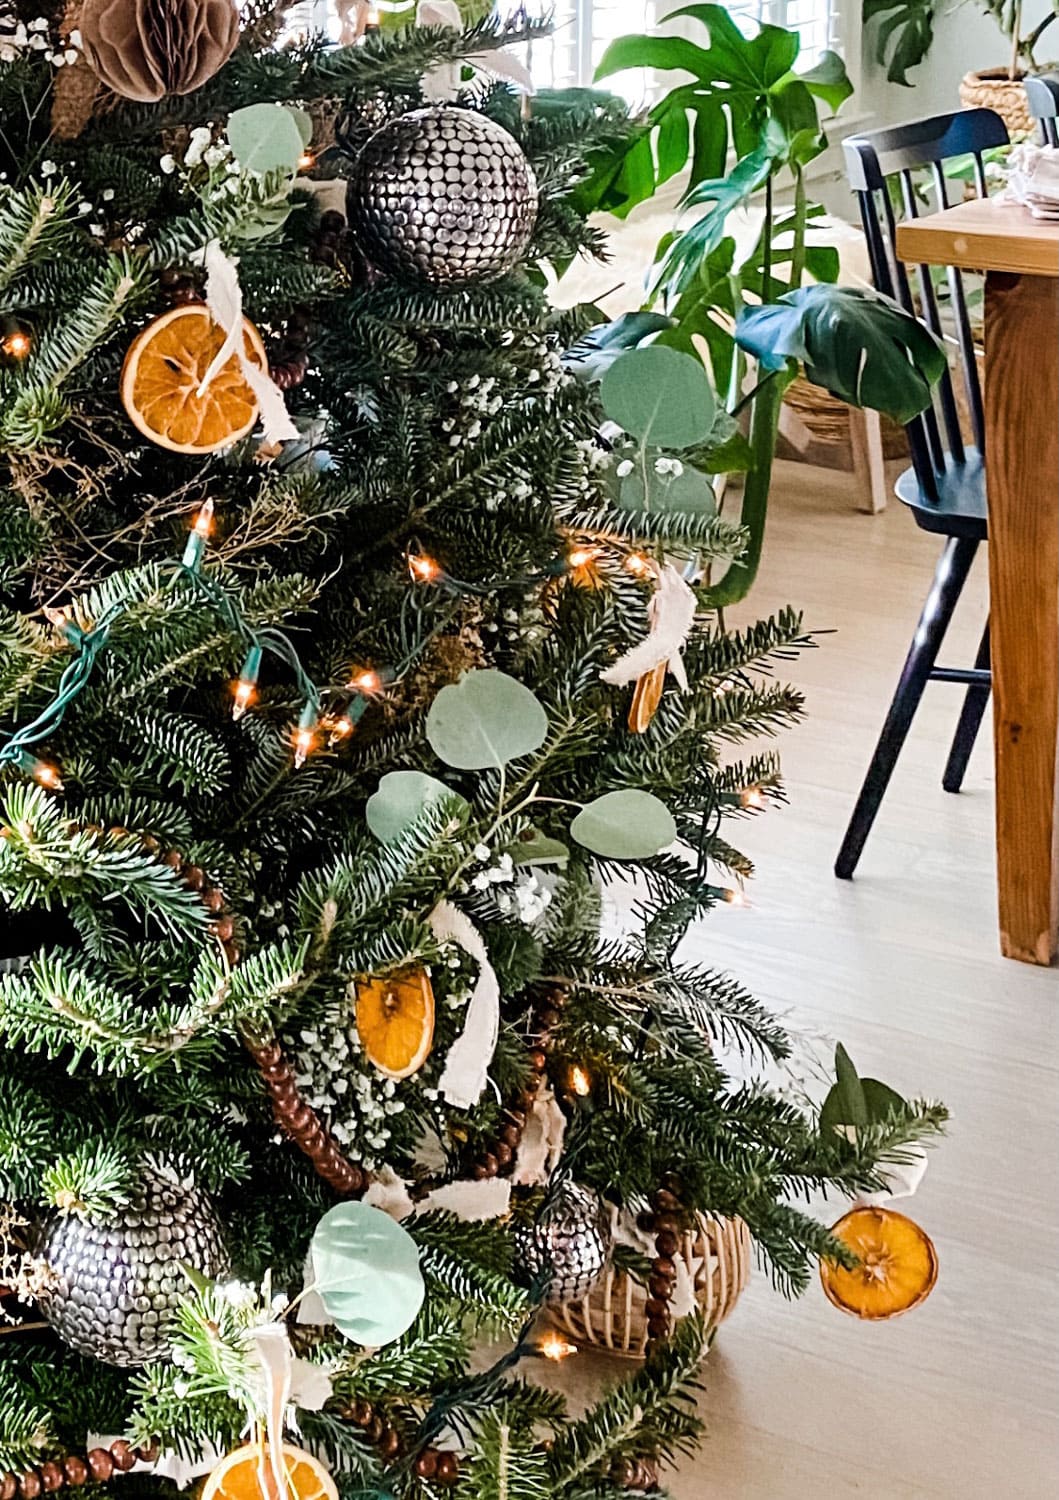 How to make dried oranges and other natural Christmas decorations